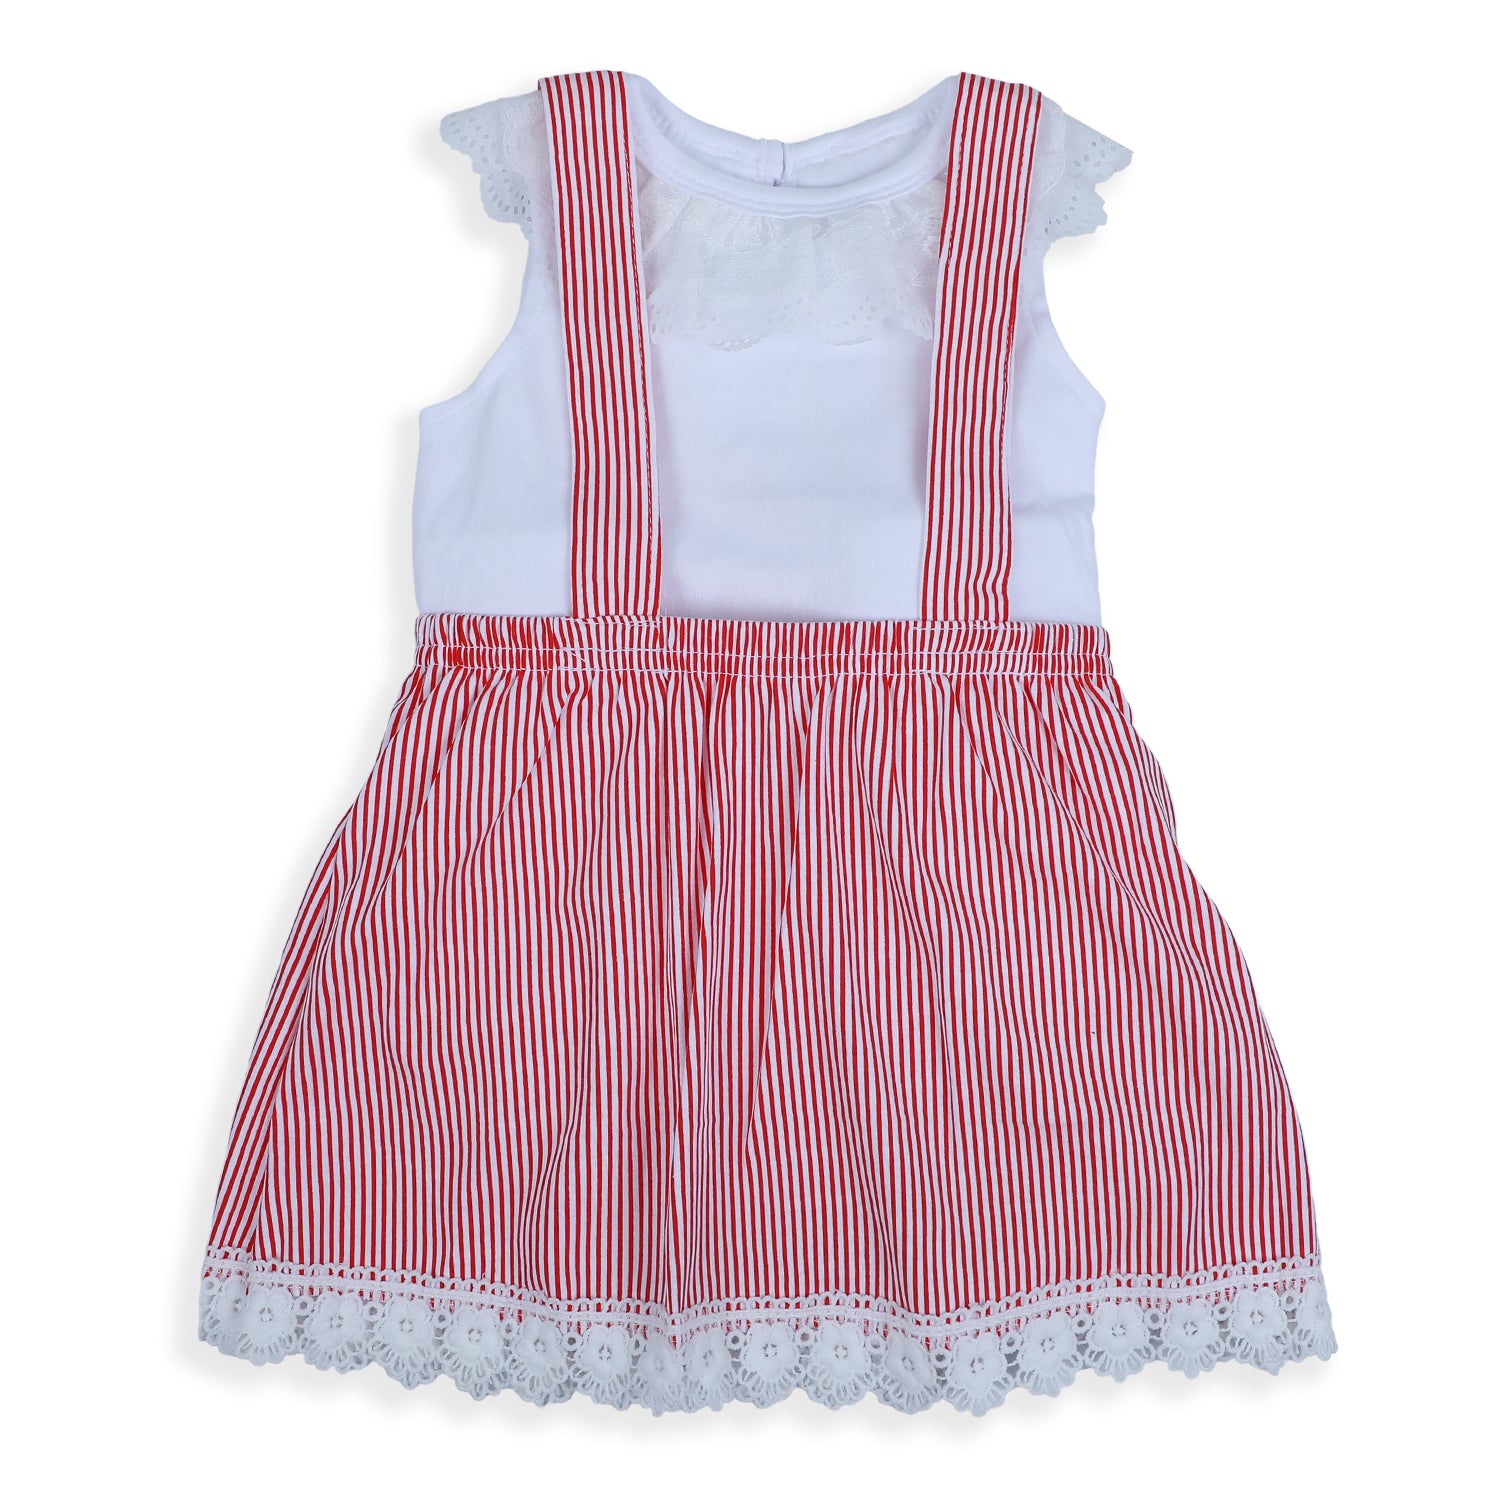 Baby Moo Striped Suspenders Skirt With Lace And Solid Top 2pcs Set - Red - Baby Moo